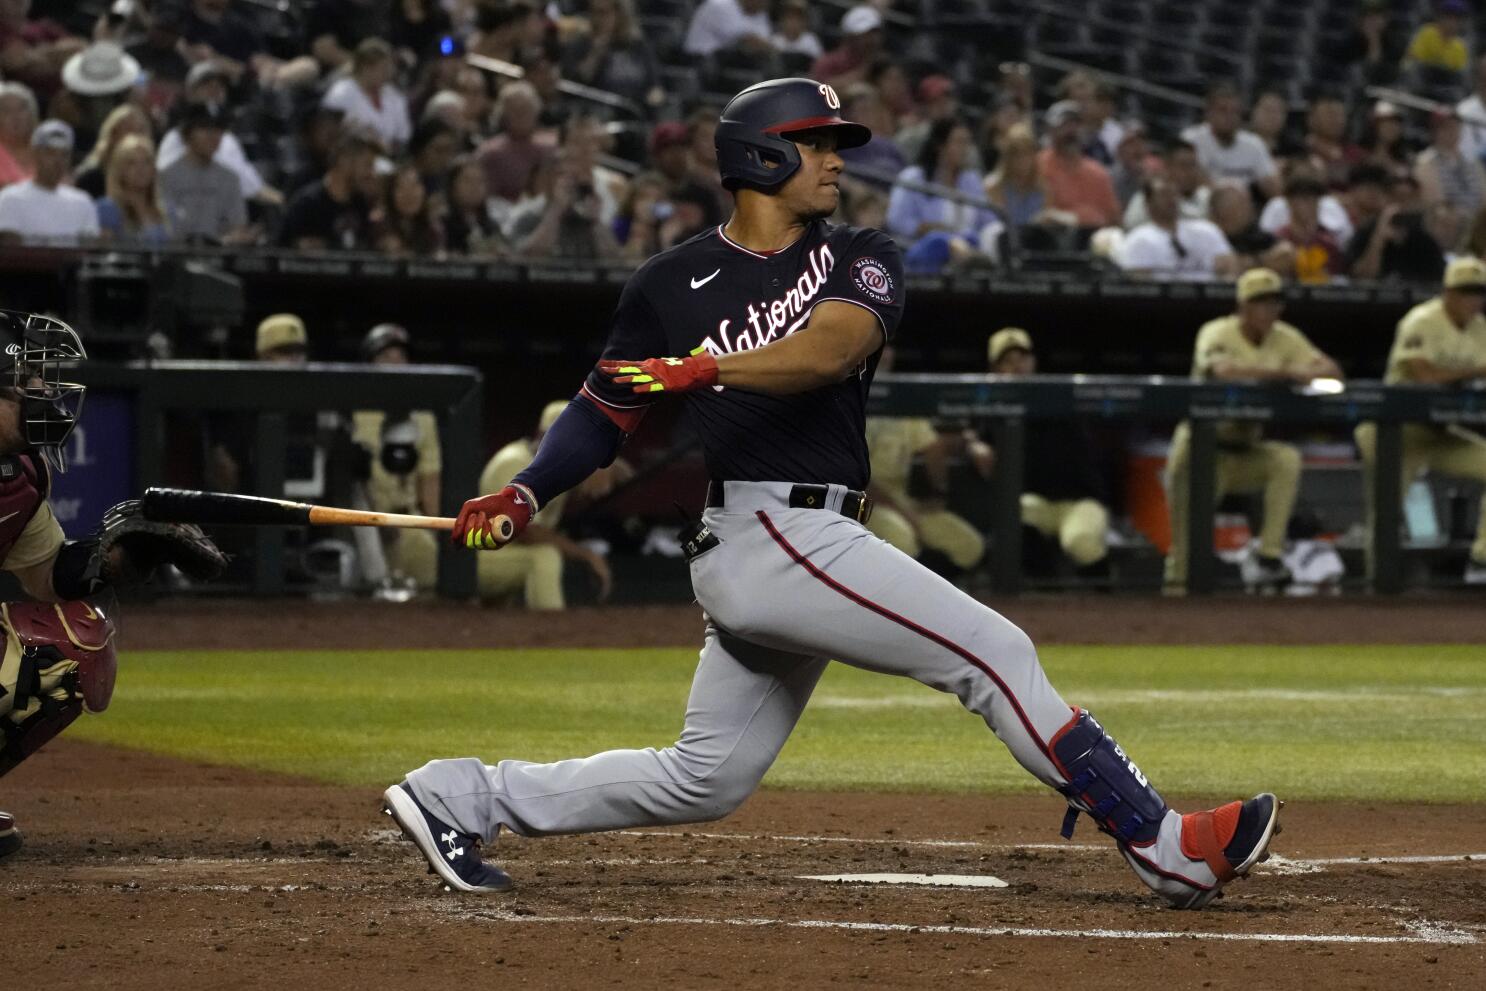 Juan Soto trade grades for Padres and Nationals - Sports Illustrated